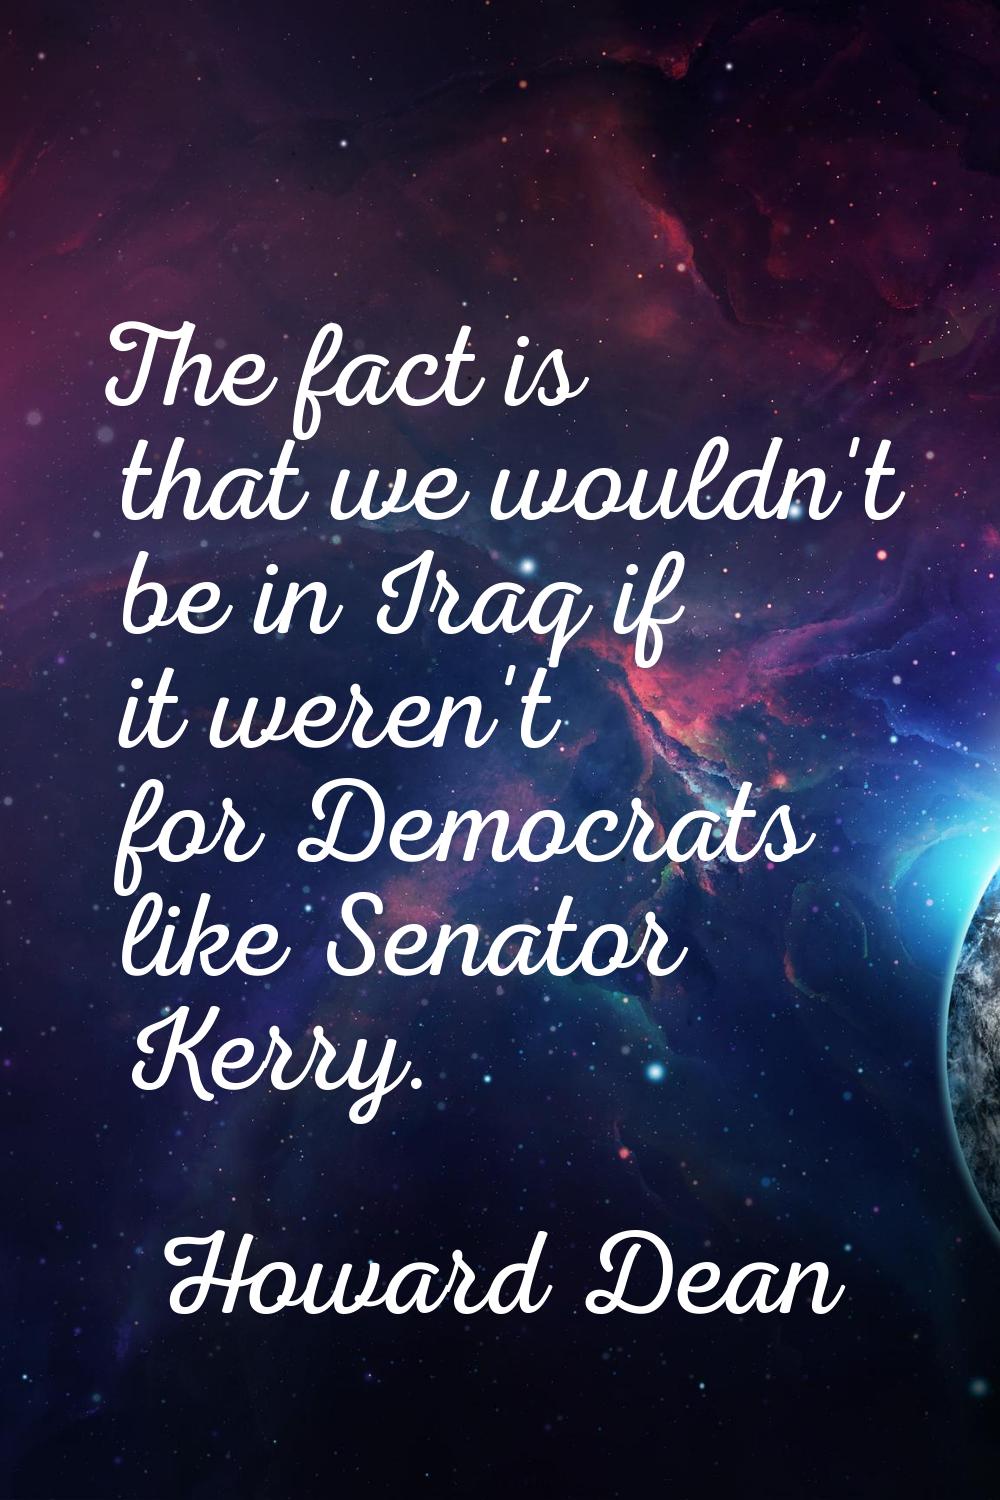 The fact is that we wouldn't be in Iraq if it weren't for Democrats like Senator Kerry.